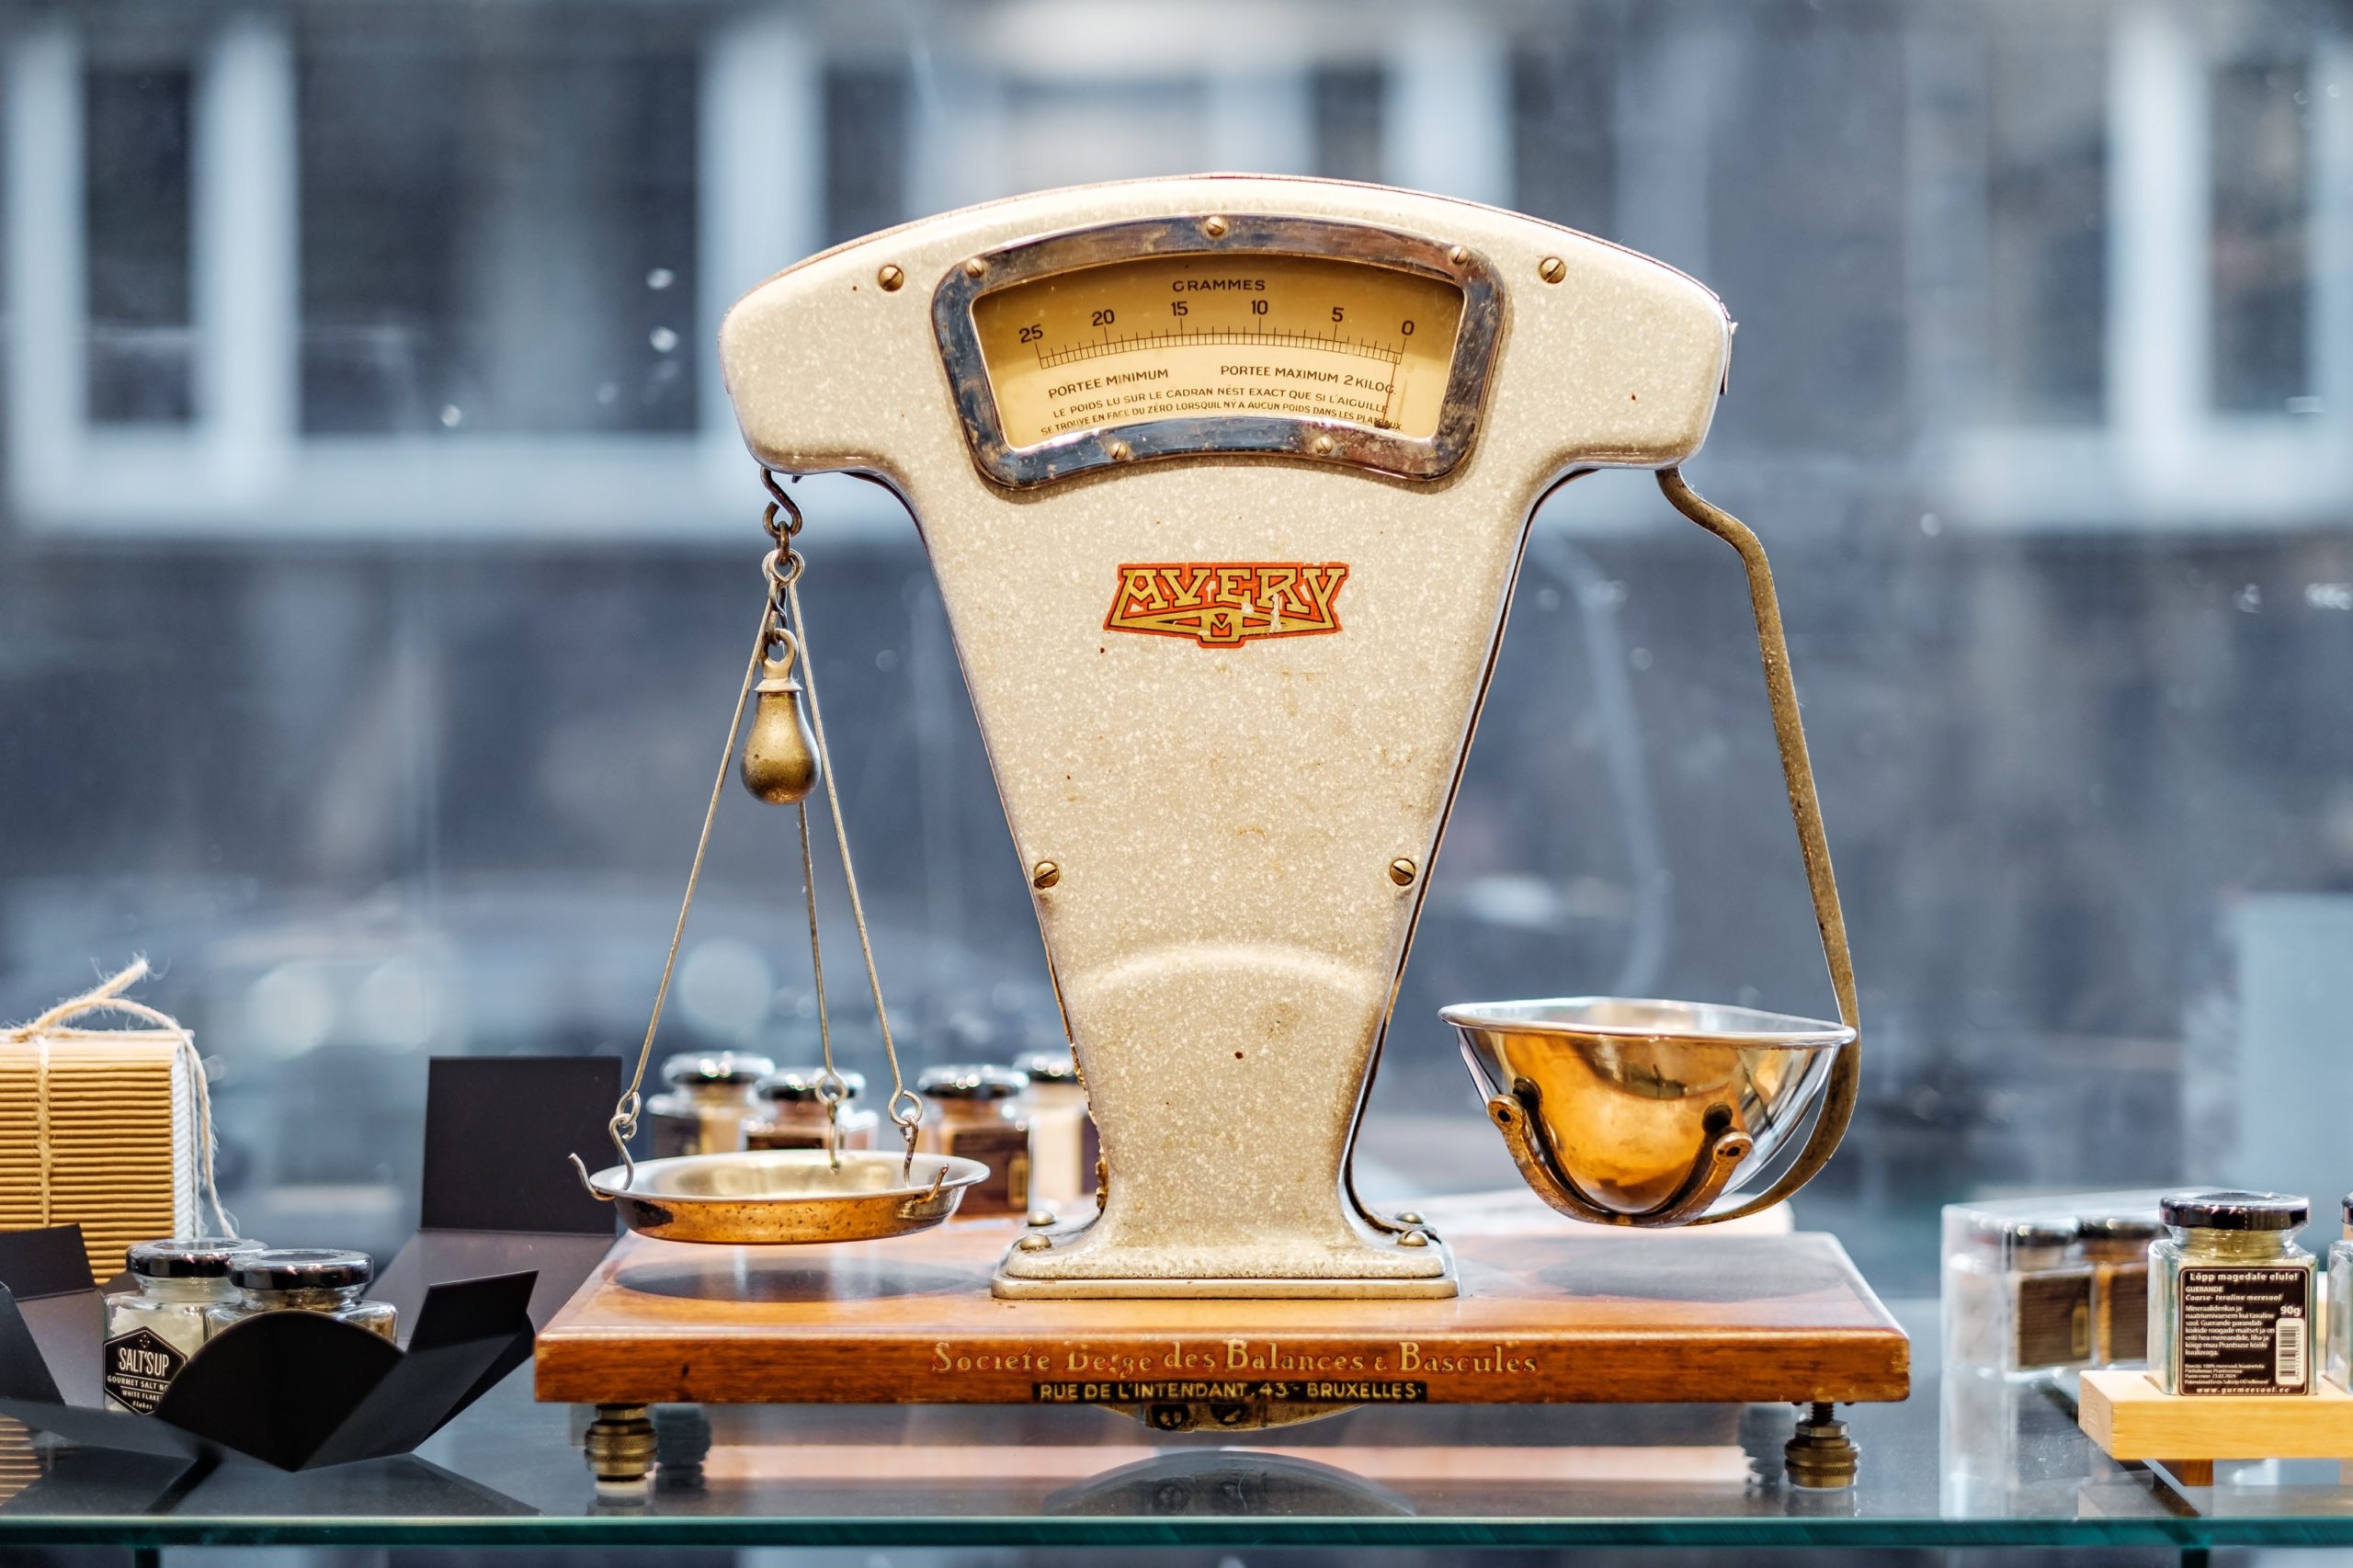 Scale showing one item heavier than another.